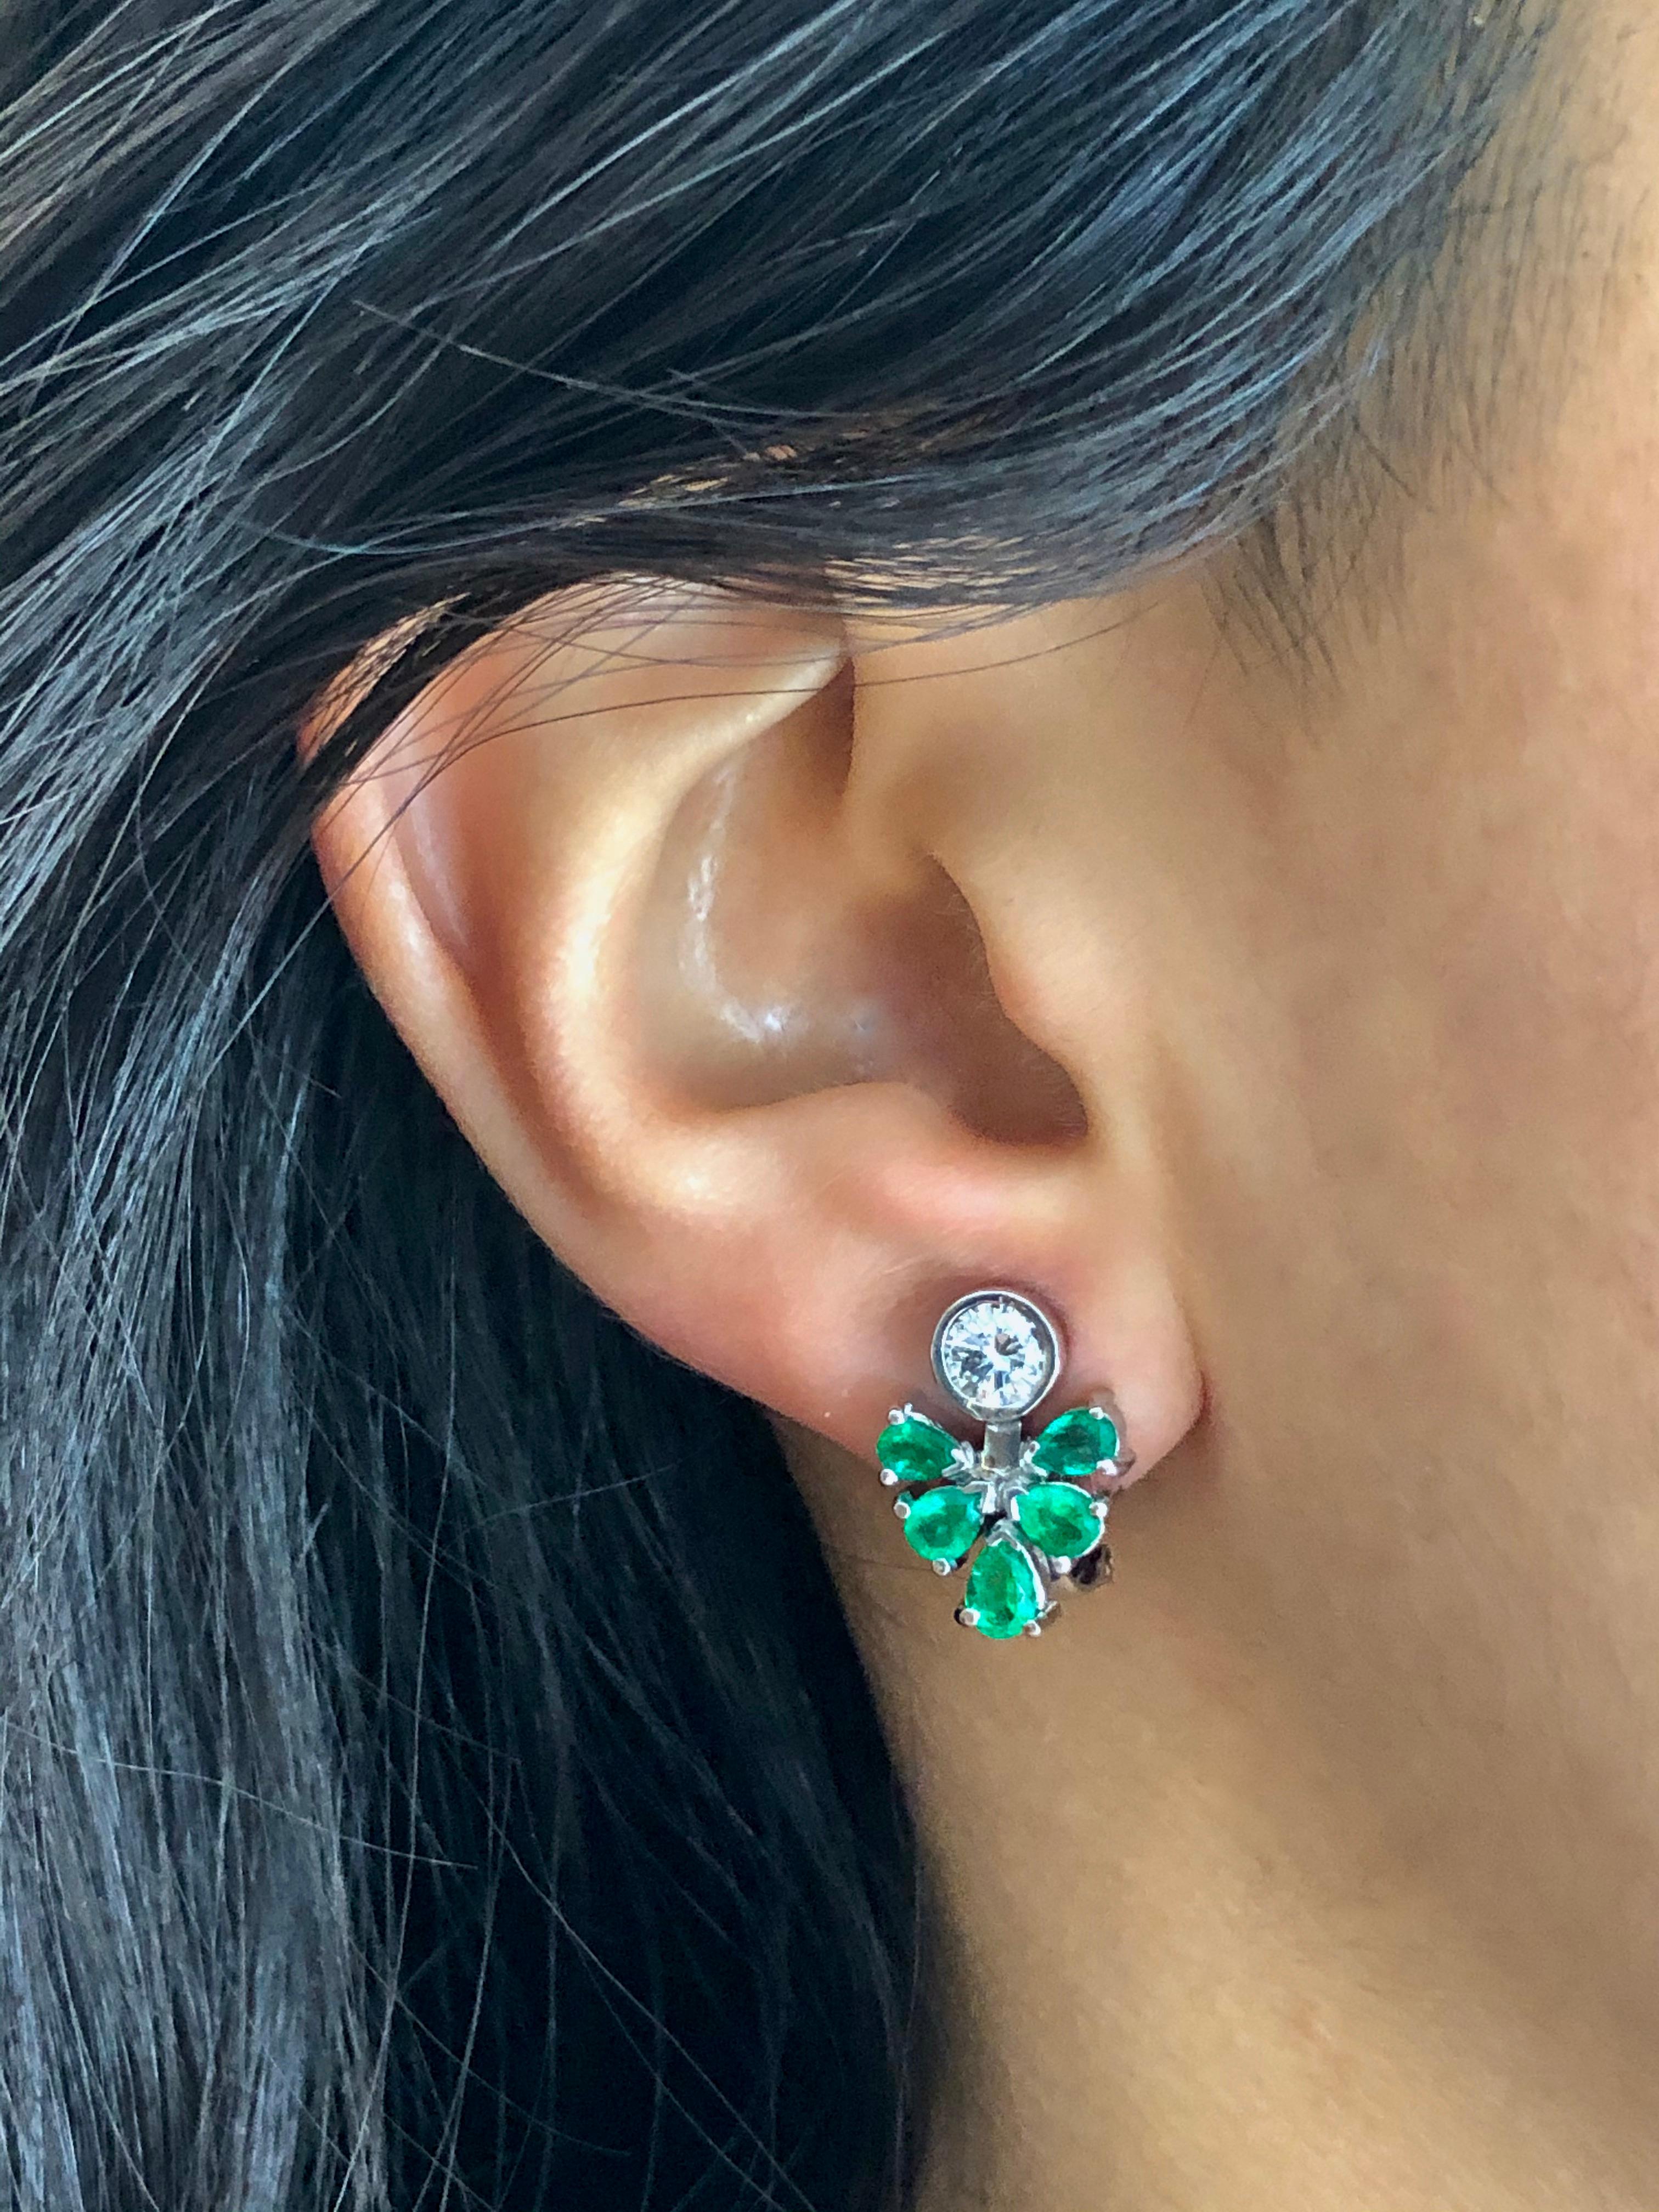 Gorgeous 2.50 Carat Colombian Natural Emerald Diamond Cluster Cocktail Clip-on Earrings.
Primary Stone: 100% Natural Colombian Emerald
Shape or Cut: Pear Cut
Emerald Weight: Over 1.55 Carats
Average Color/Clarity Emerald: AAA+ Intense Medium Bluish